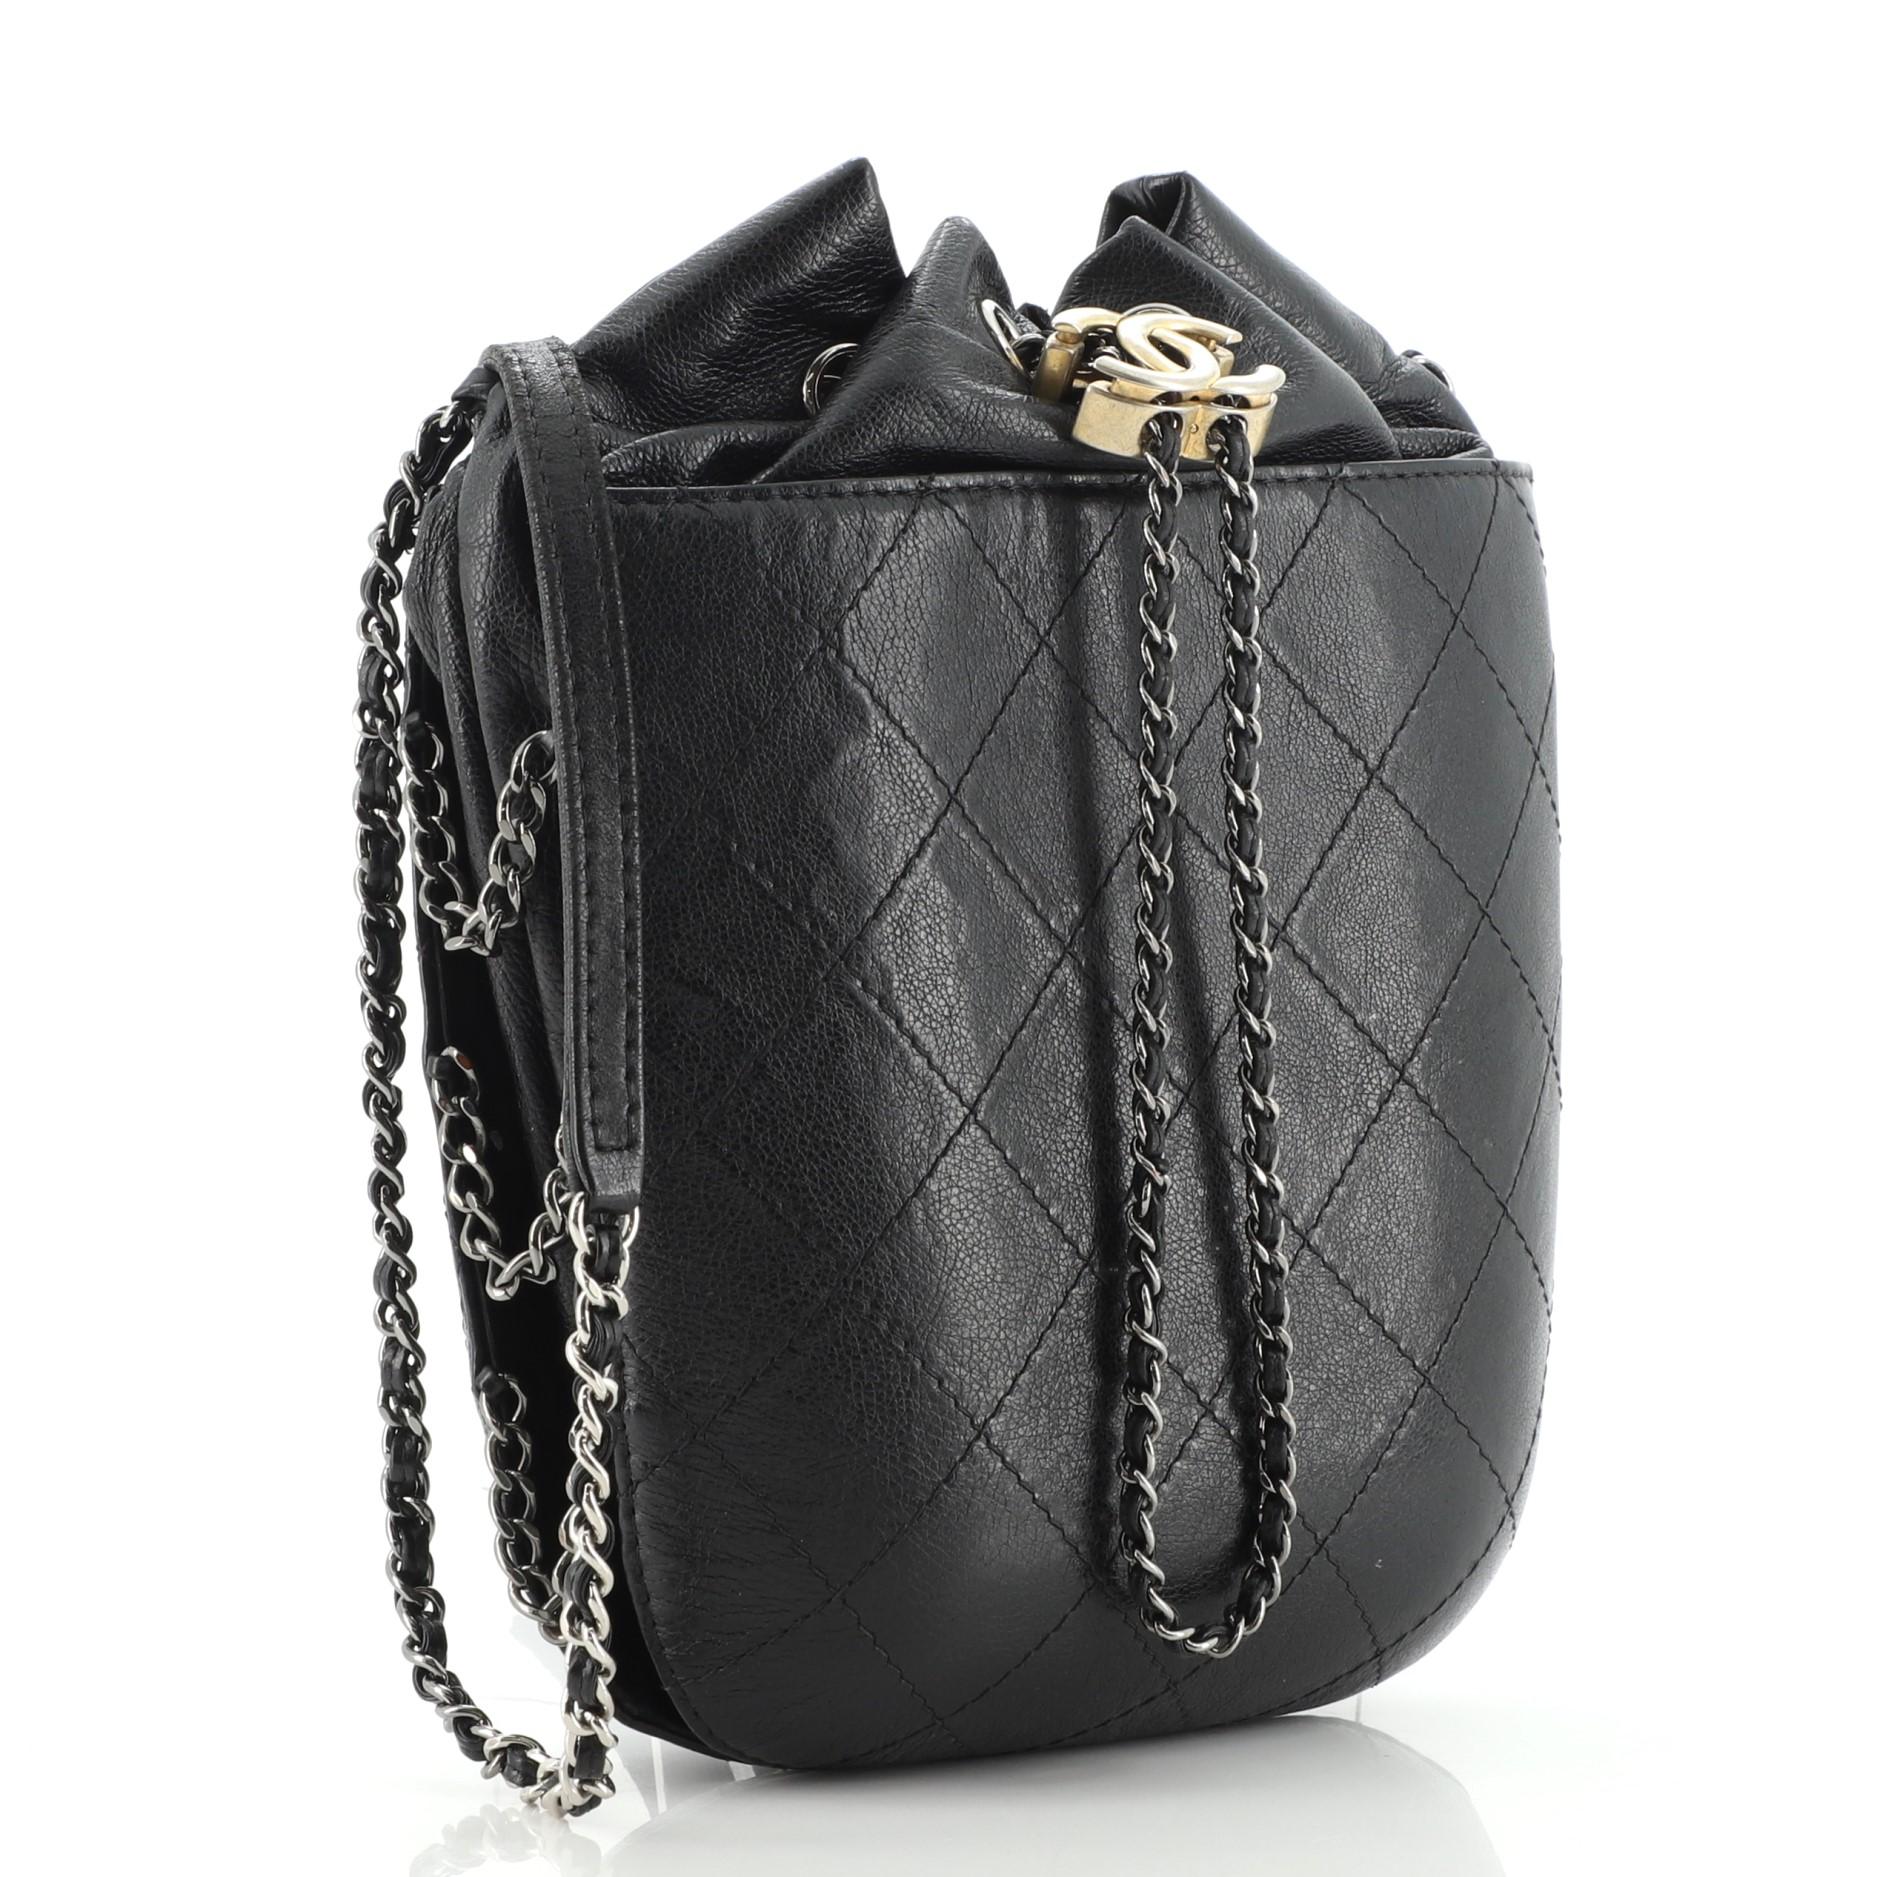 Chanel Gabrielle Bucket Bag - For Sale on 1stDibs  chanel small gabrielle  bucket bag, gabrielle bucket bag chanel, chanel drawstring bag